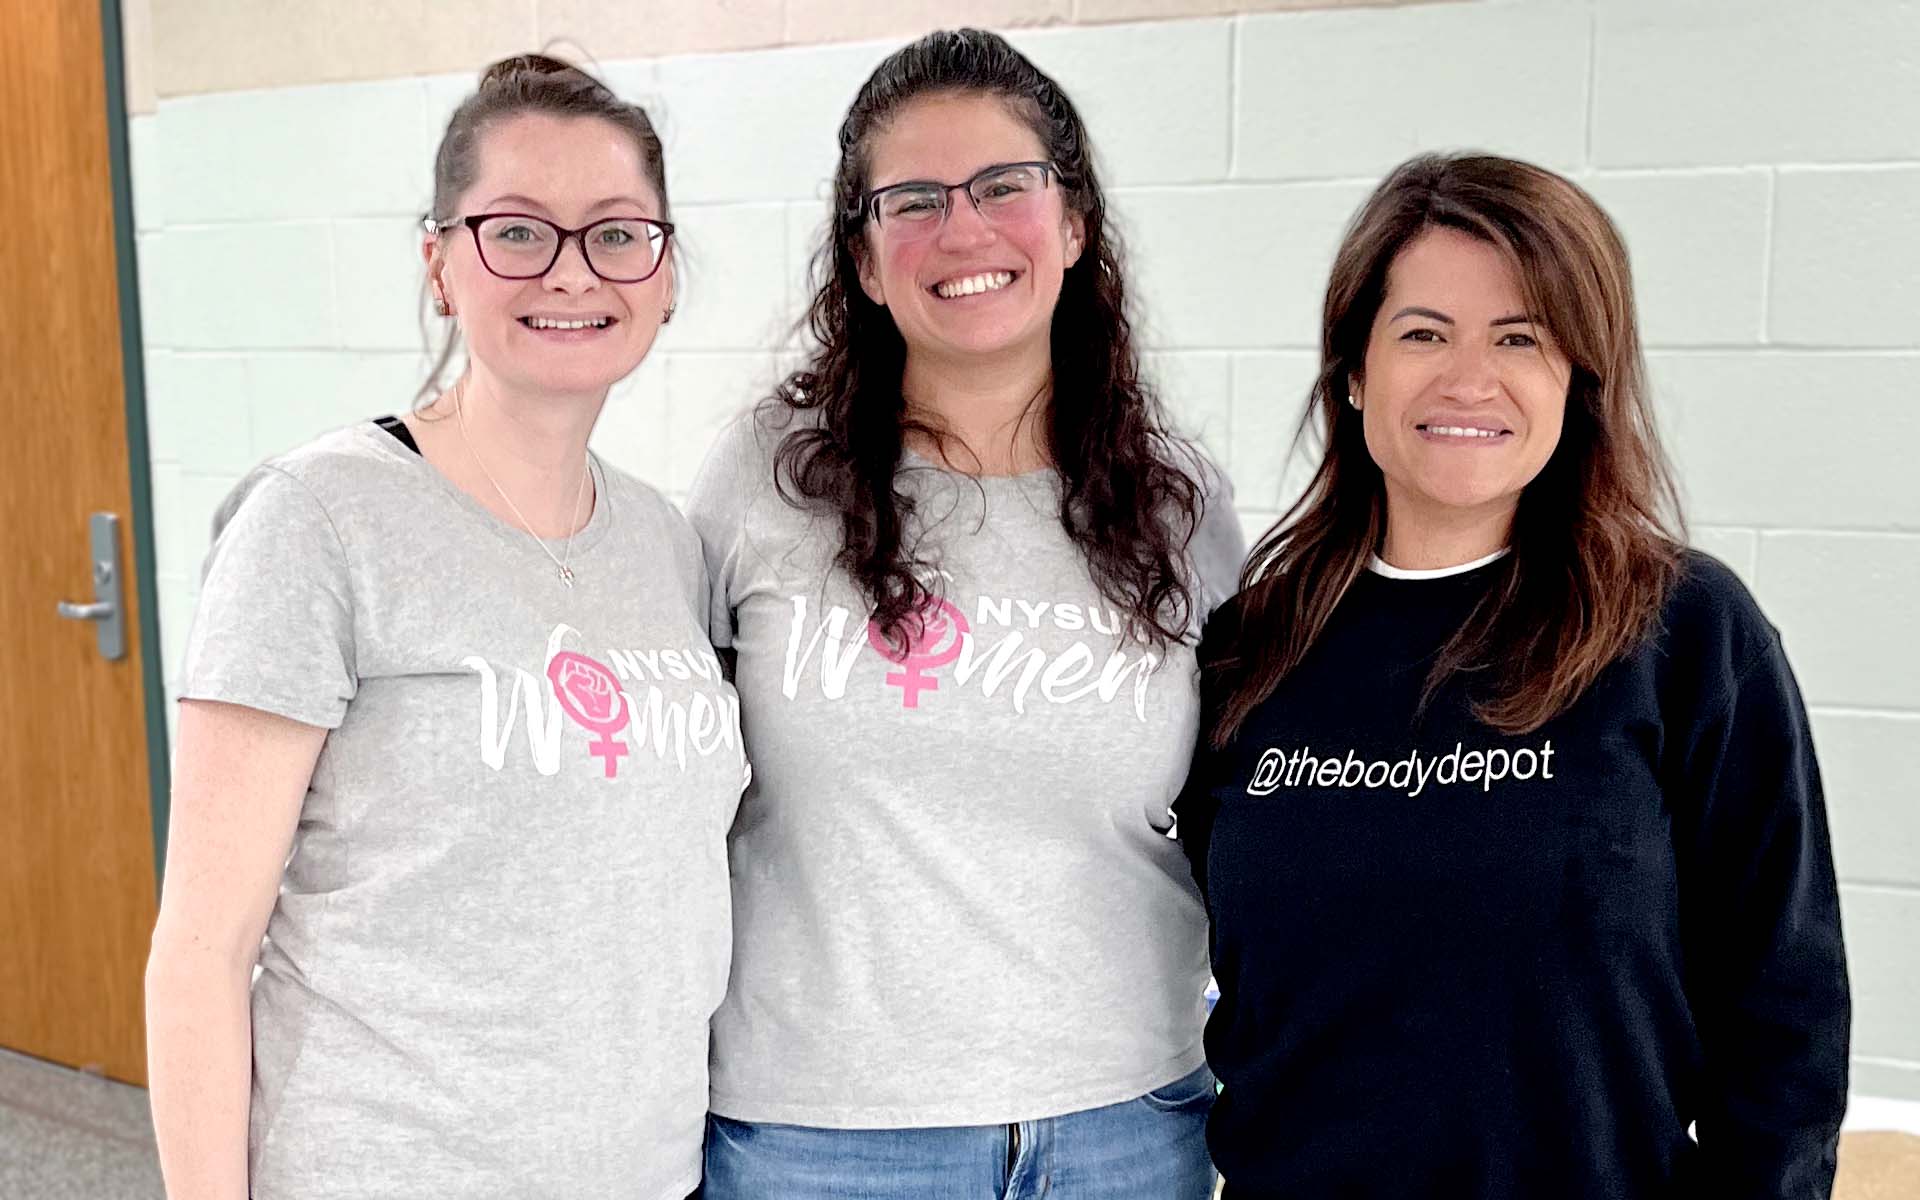 NYSUT Women: How to create a women's empowerment club in any school